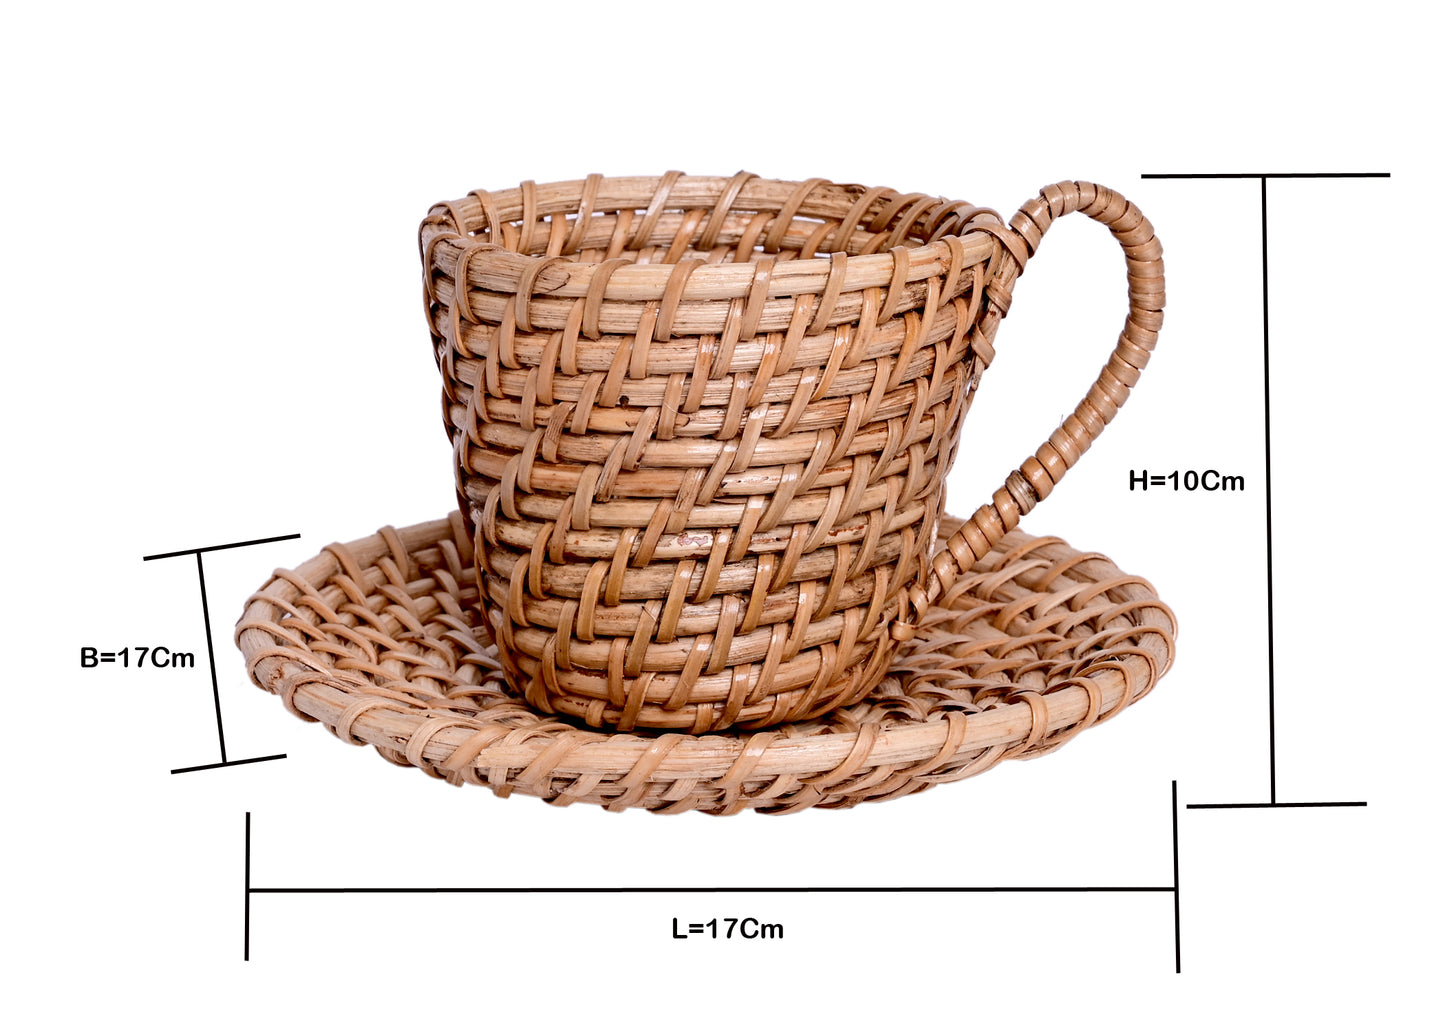 The Weaver's Nest Handmade Natural Cane Kettle Shaped Planter- Plant Stand, Plants Holder Pot for Home, Table Tops, Offices, Restaurants, Garden, Cafe, Balcony, Living Room (Brown, 25 X 18 X 12 cm)